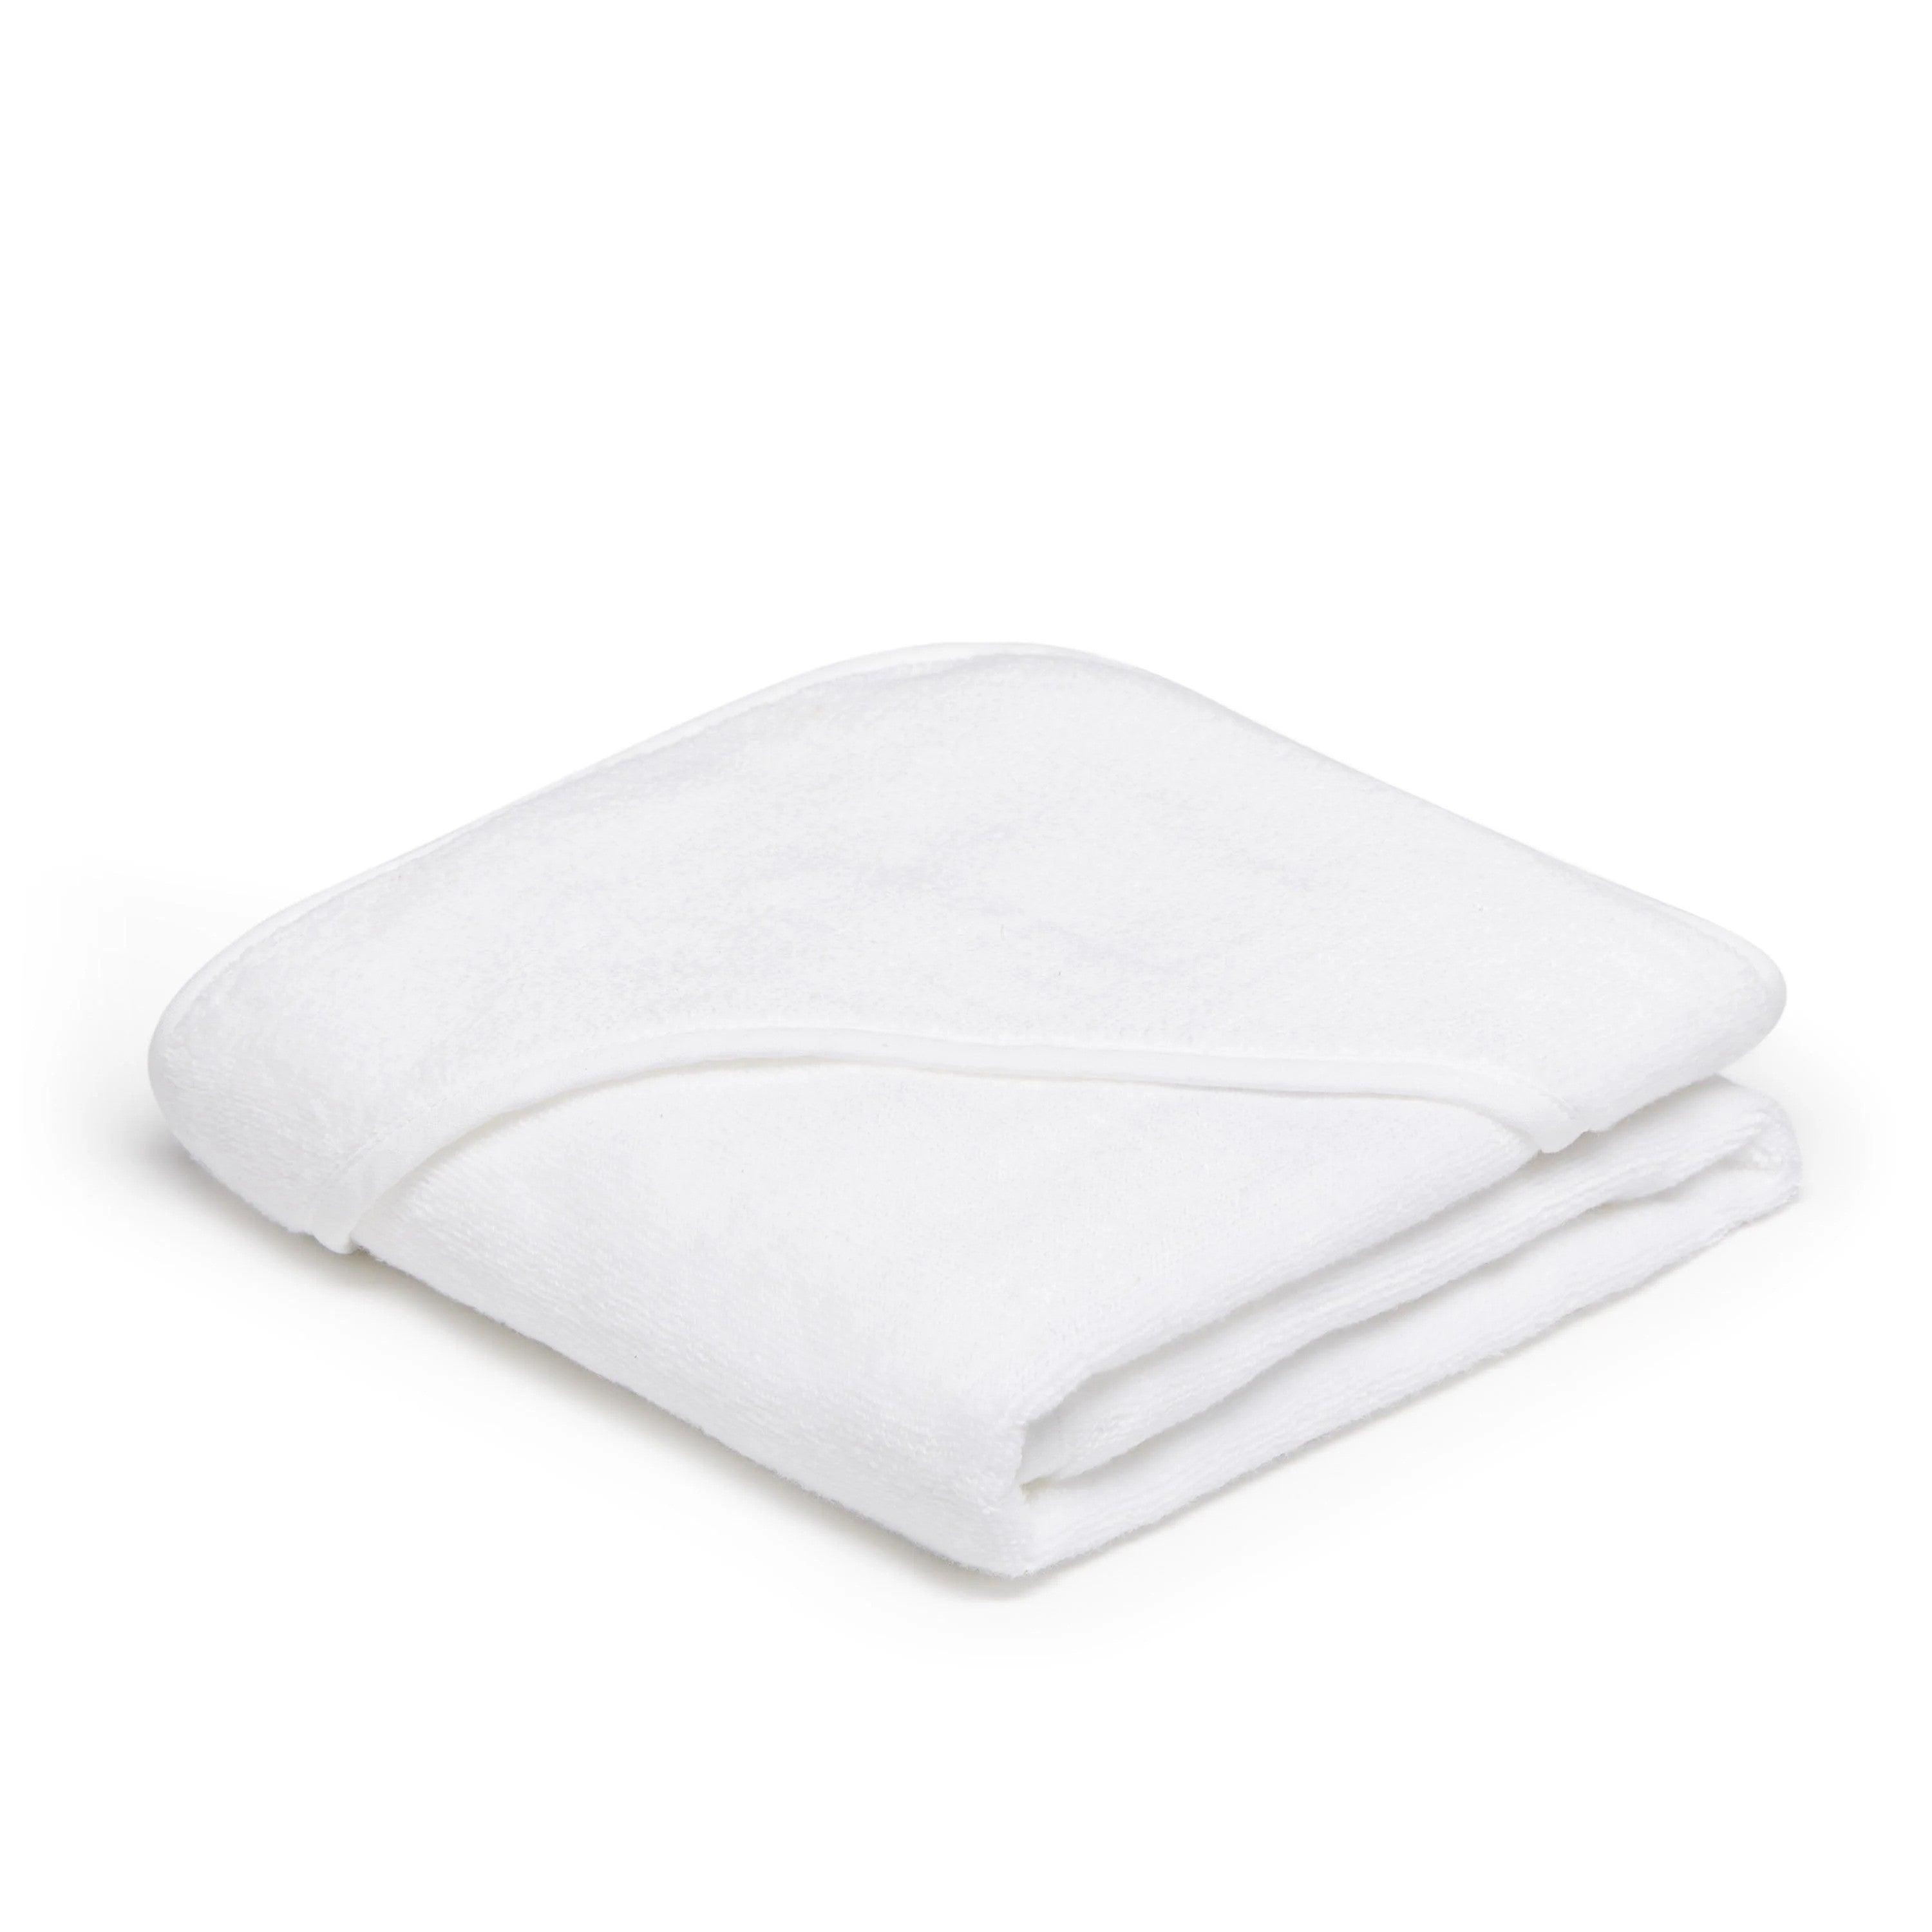 White hooded baby towel